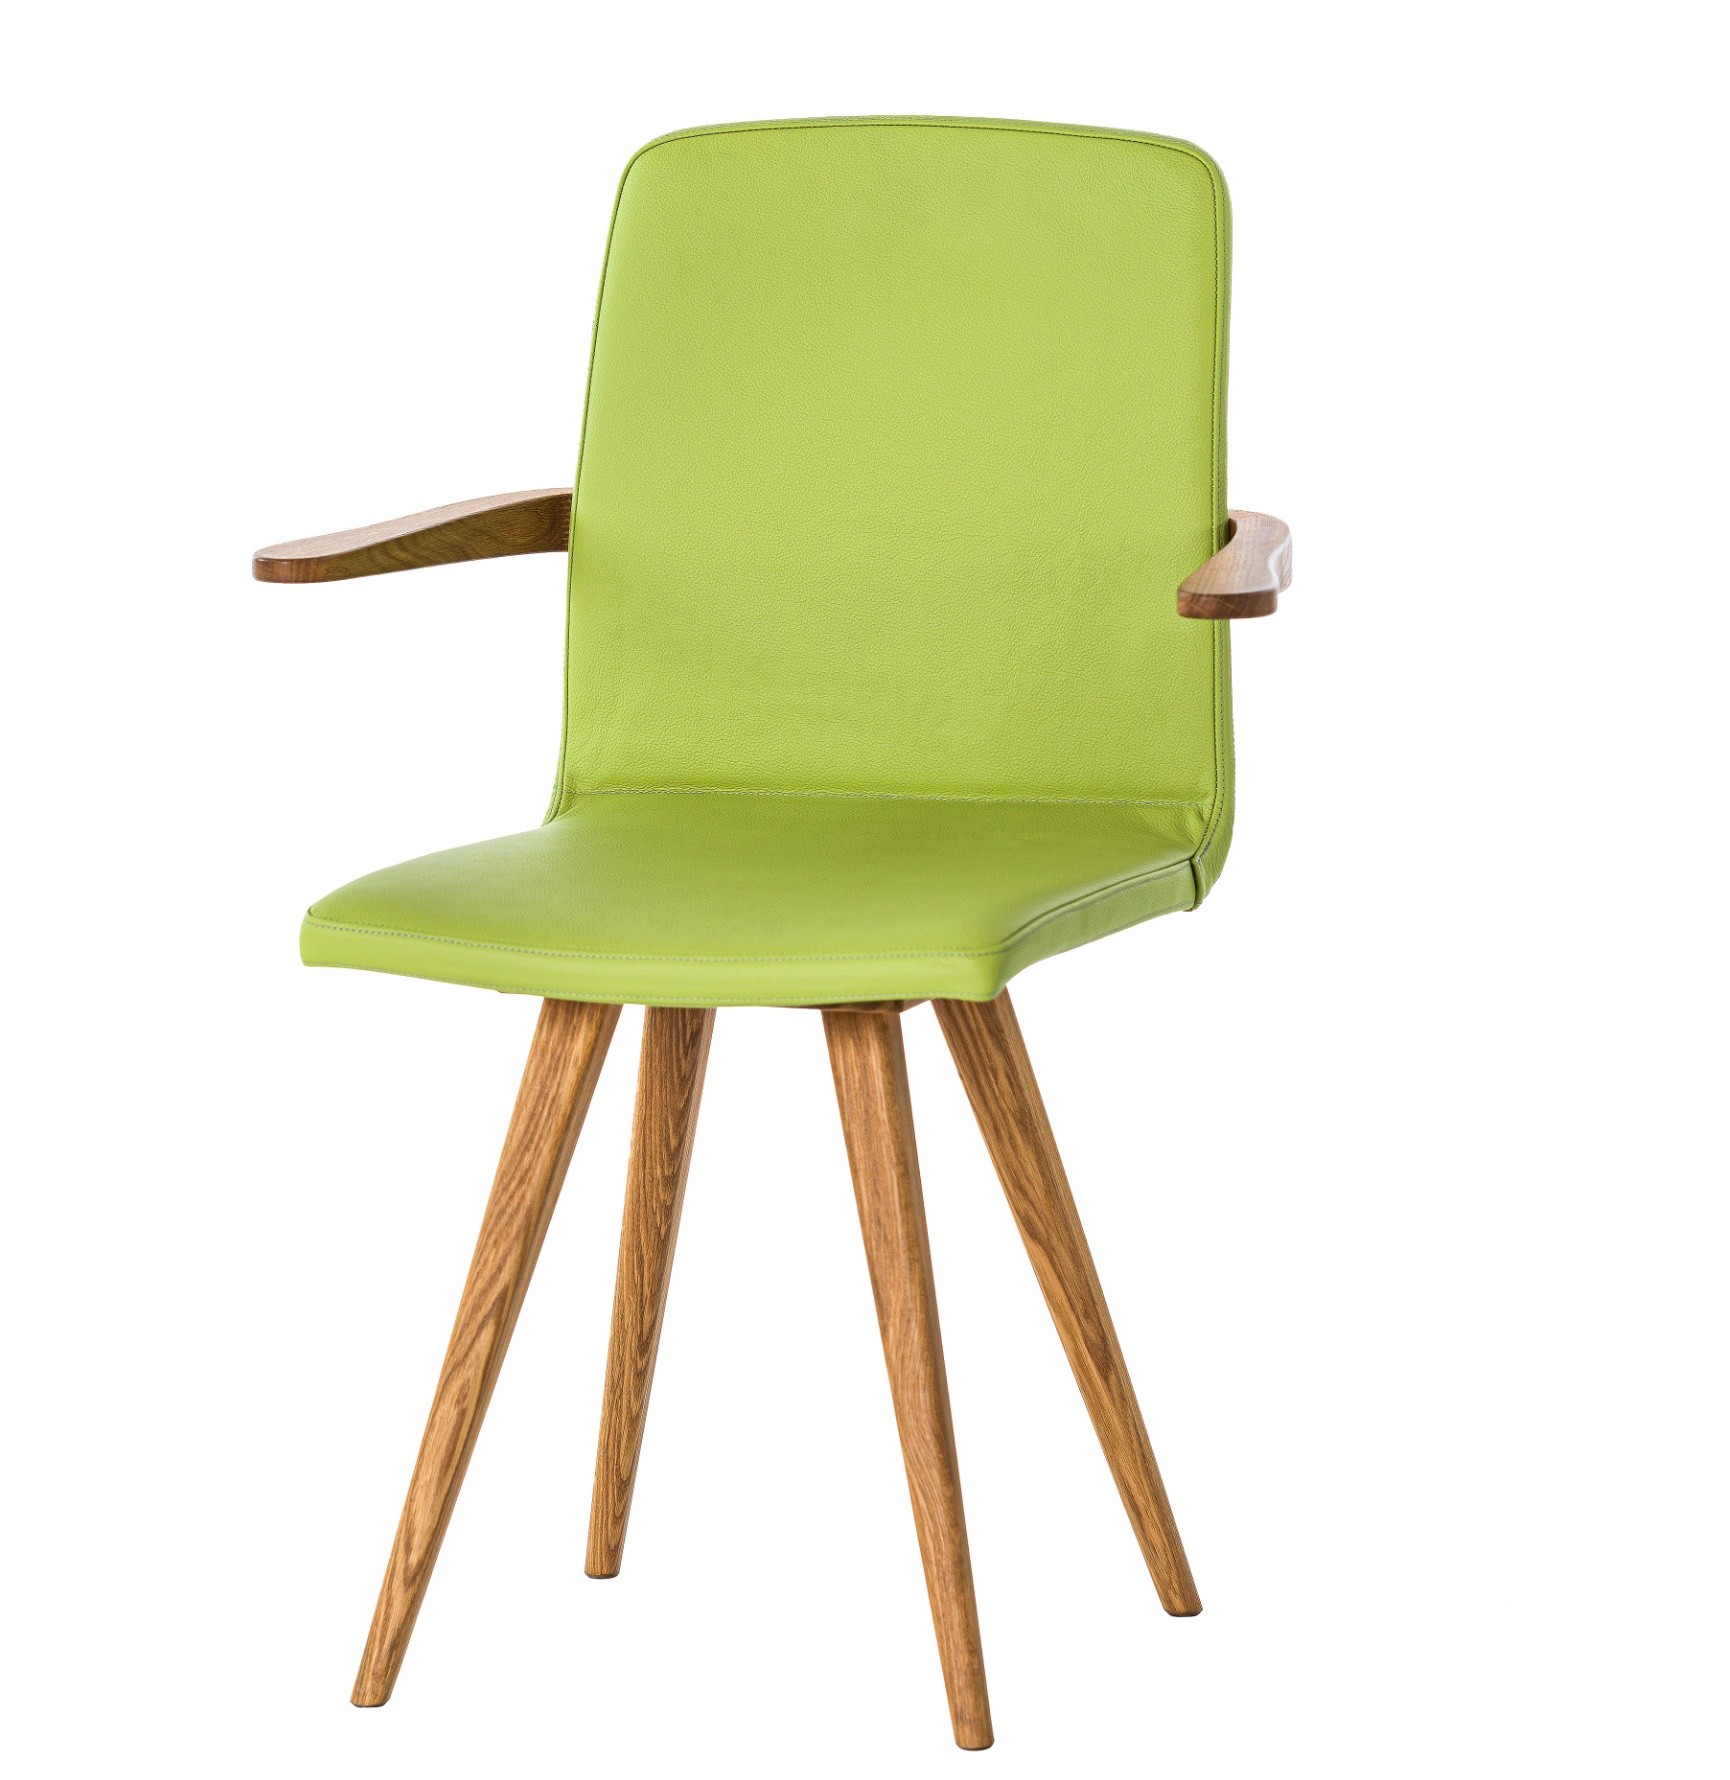 GATTA ARMCHAIR wholly upholstered